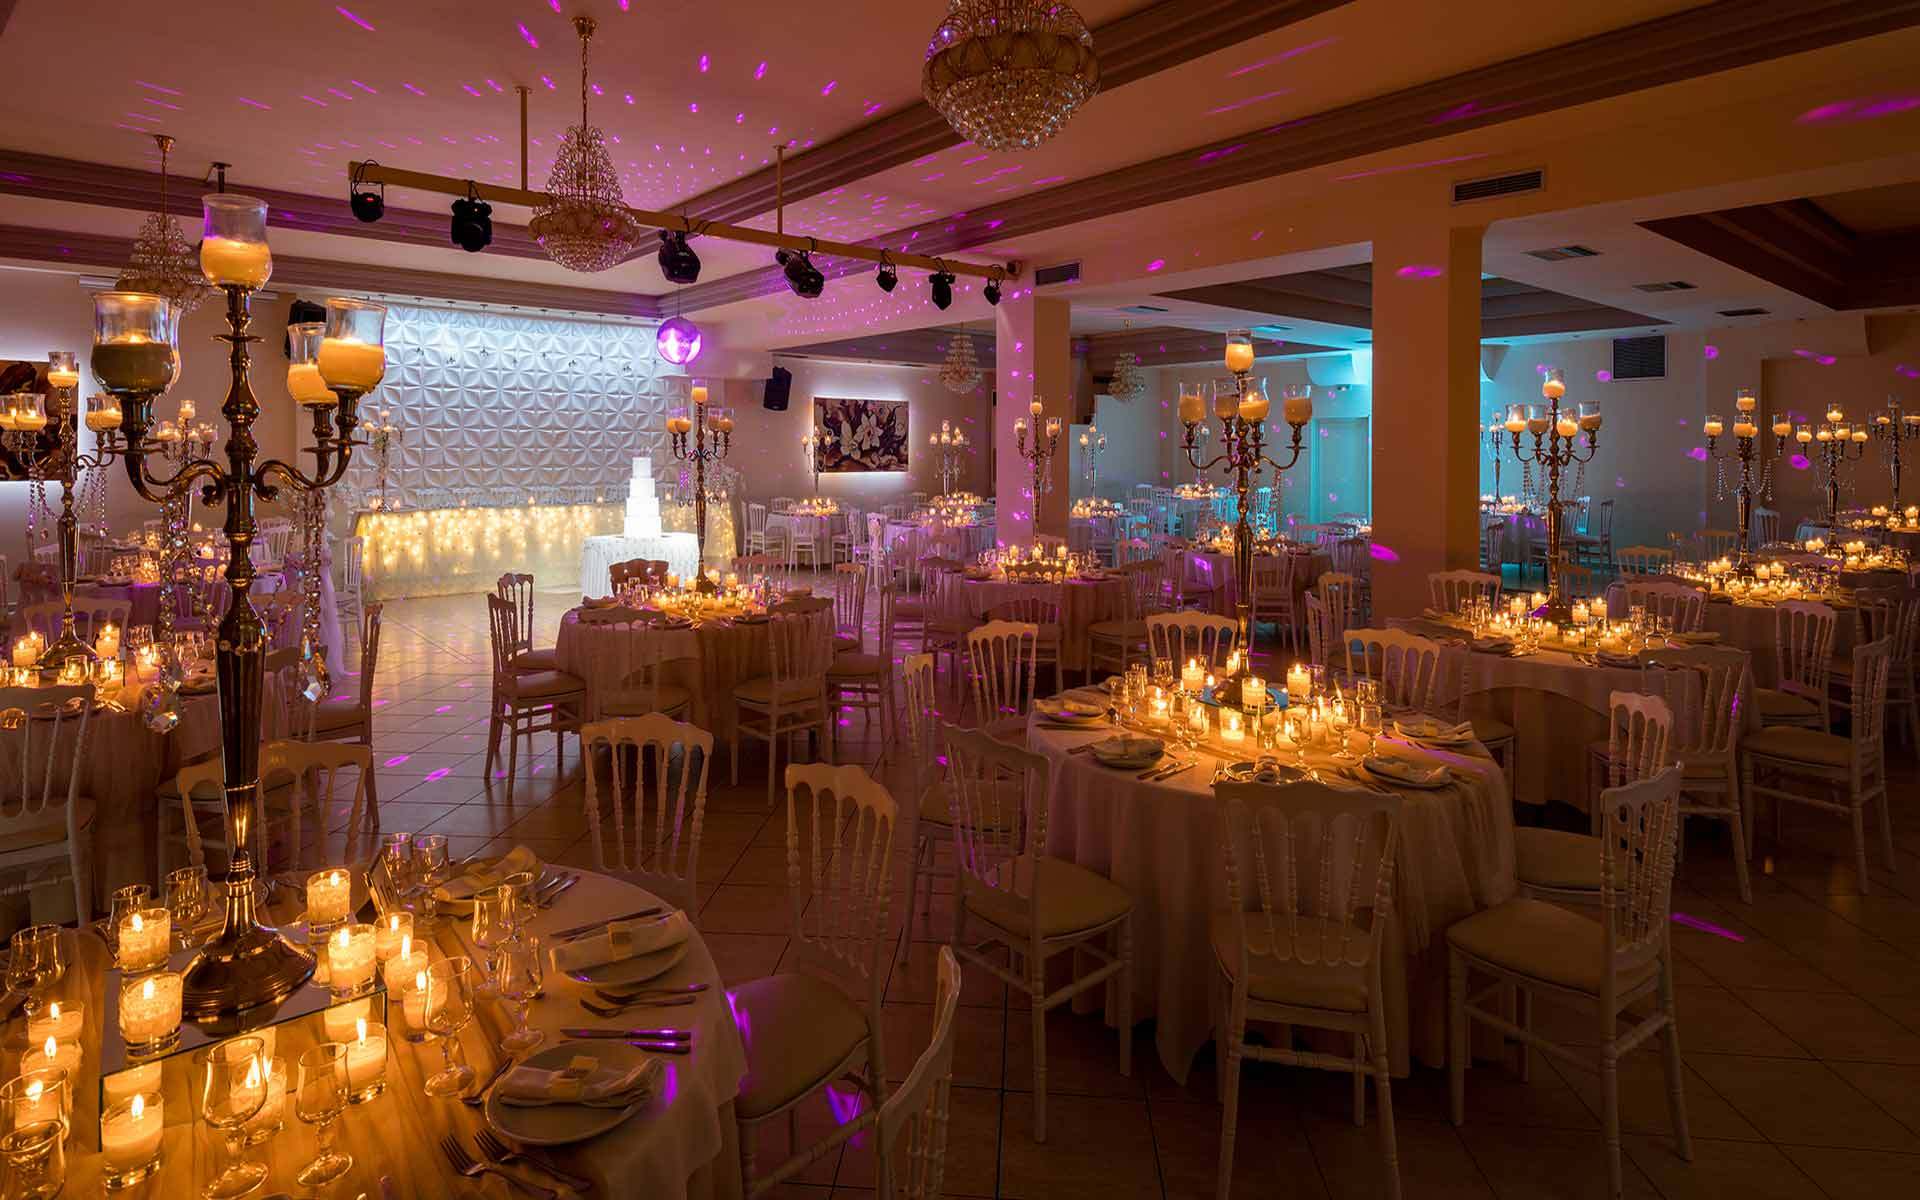 MIrafiore-venue-decoration-with-silver-candelabras-and-candles-by-Diamond-Events